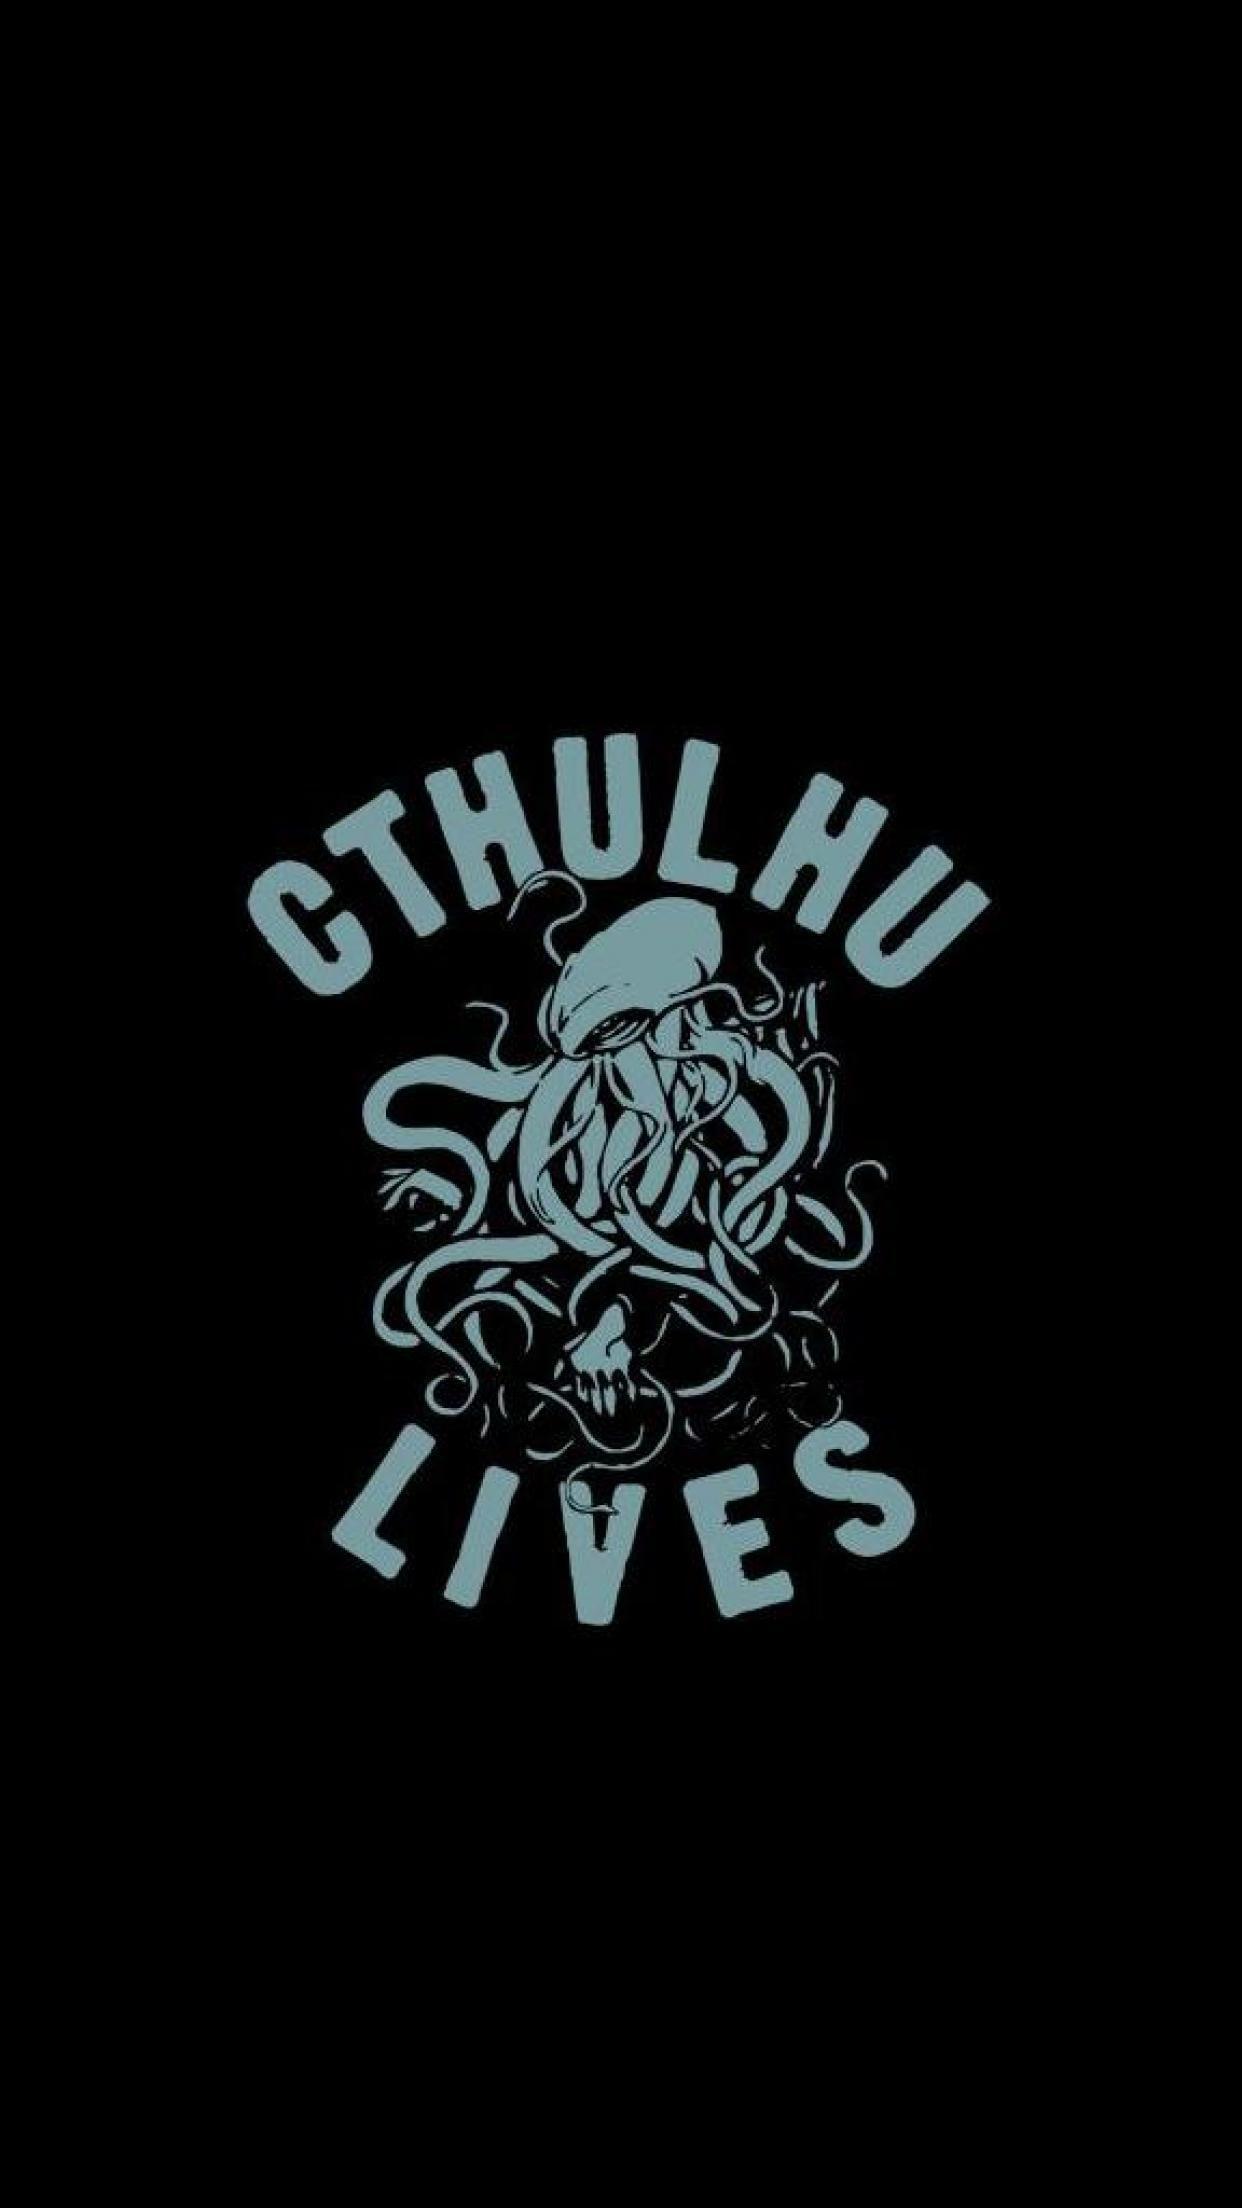 Cthulhu Cthulhu is a cosmic entity created by writer h p lovecraft